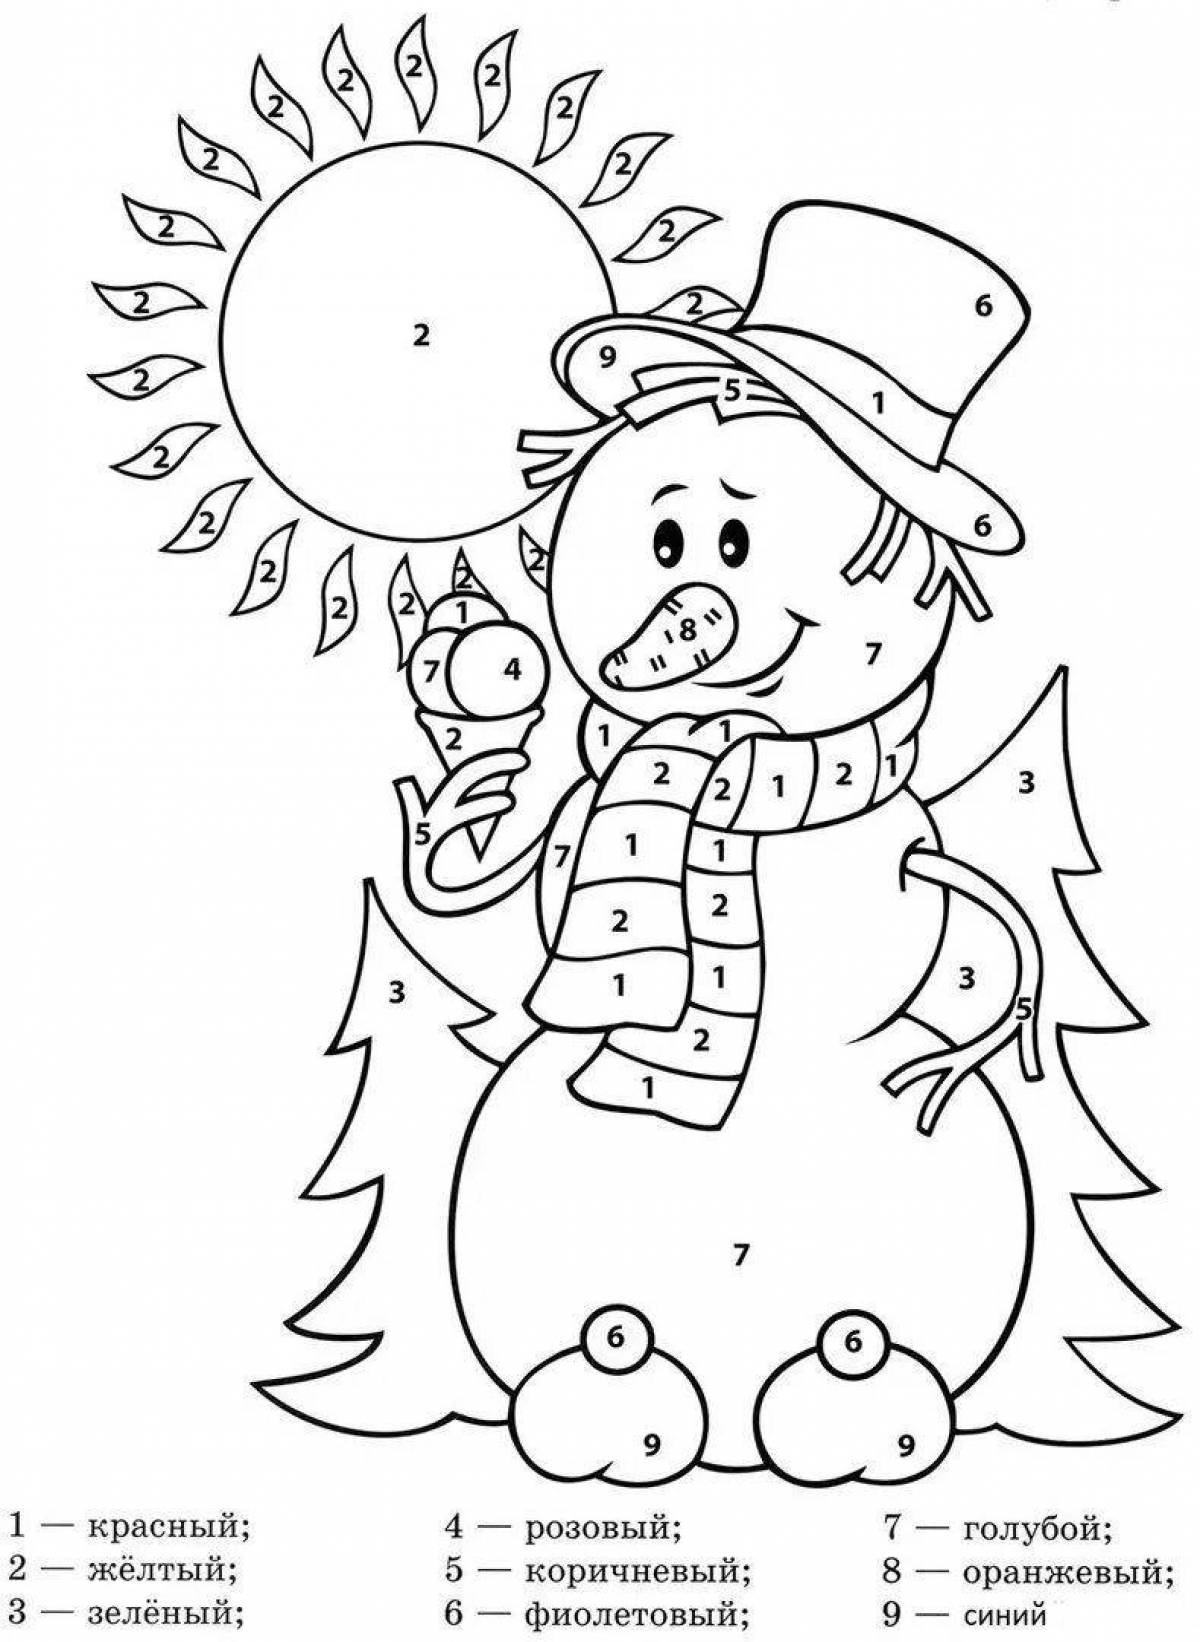 Playful winter by numbers coloring page